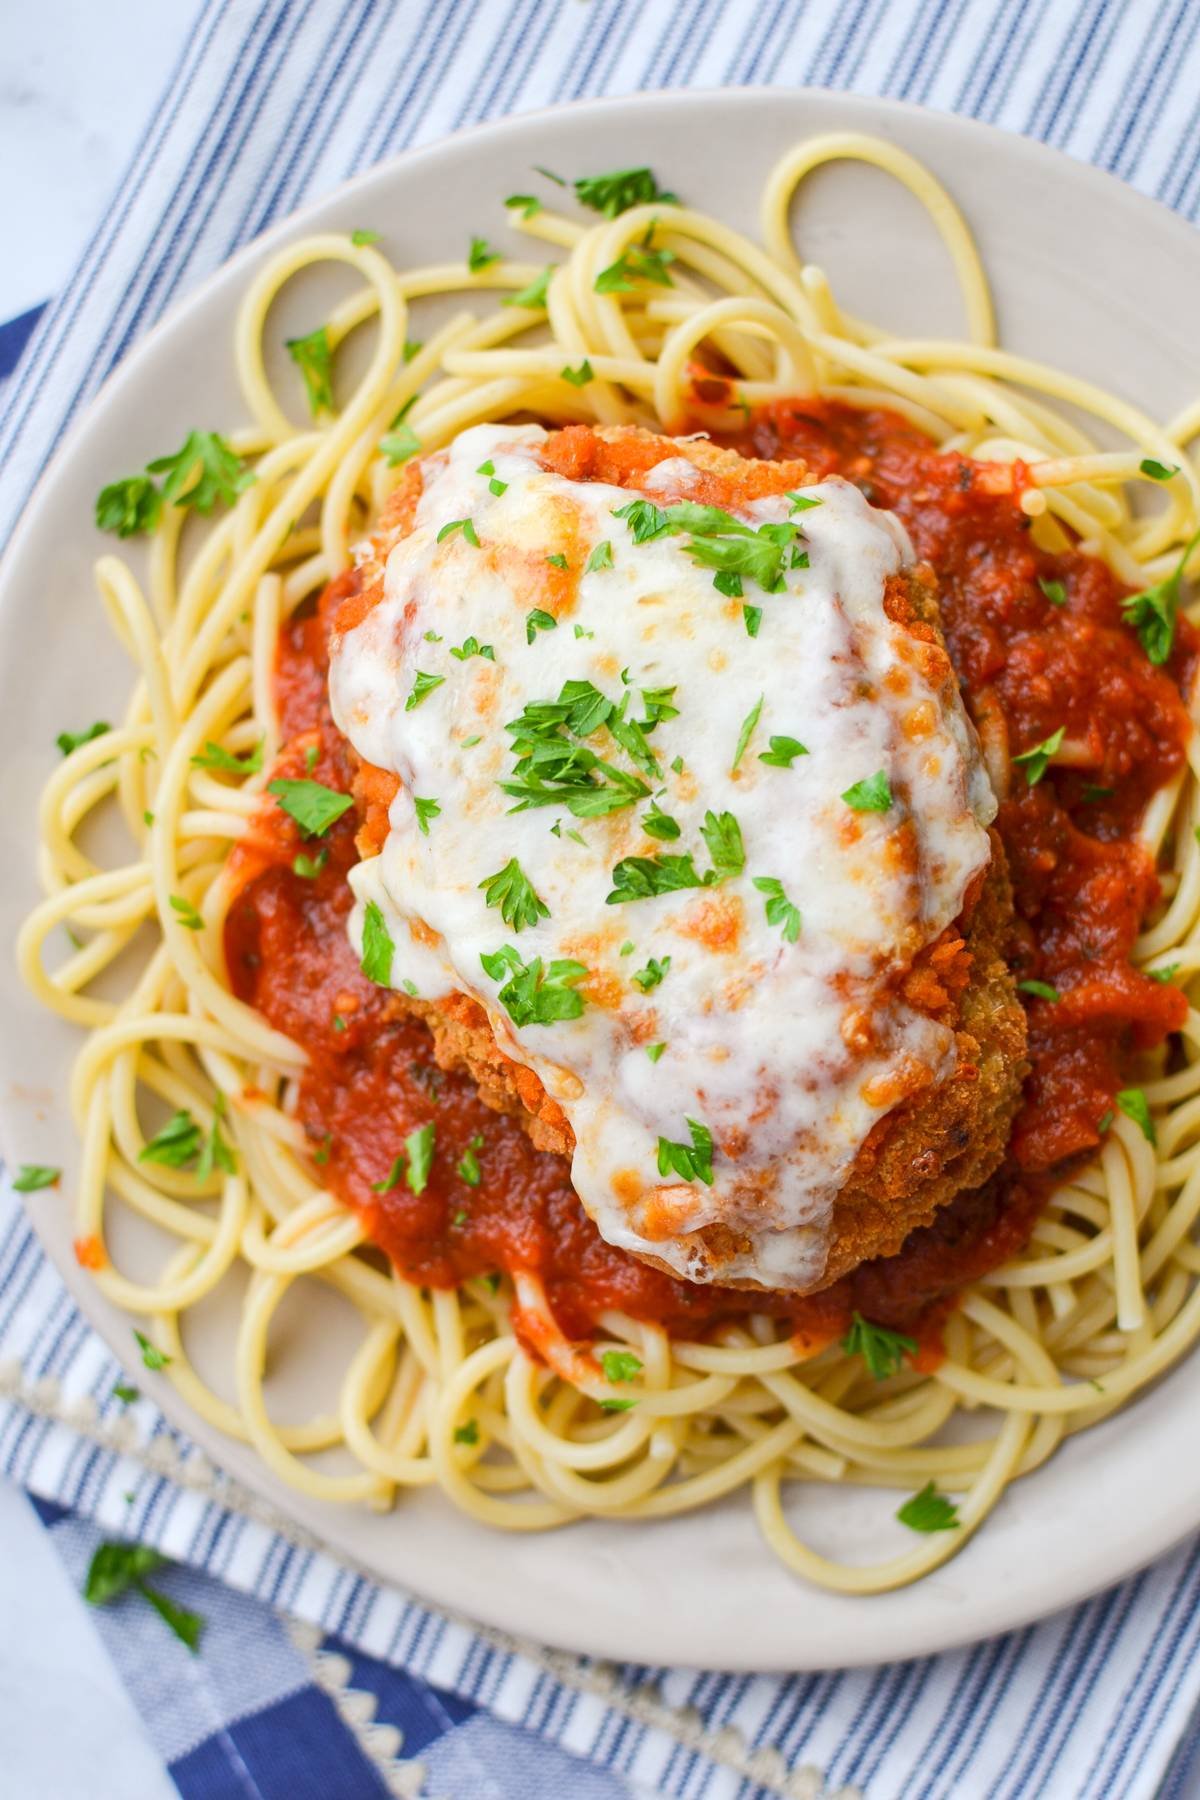 A plate of spaghetti noodles with chicken parmesan and marinara sauce.